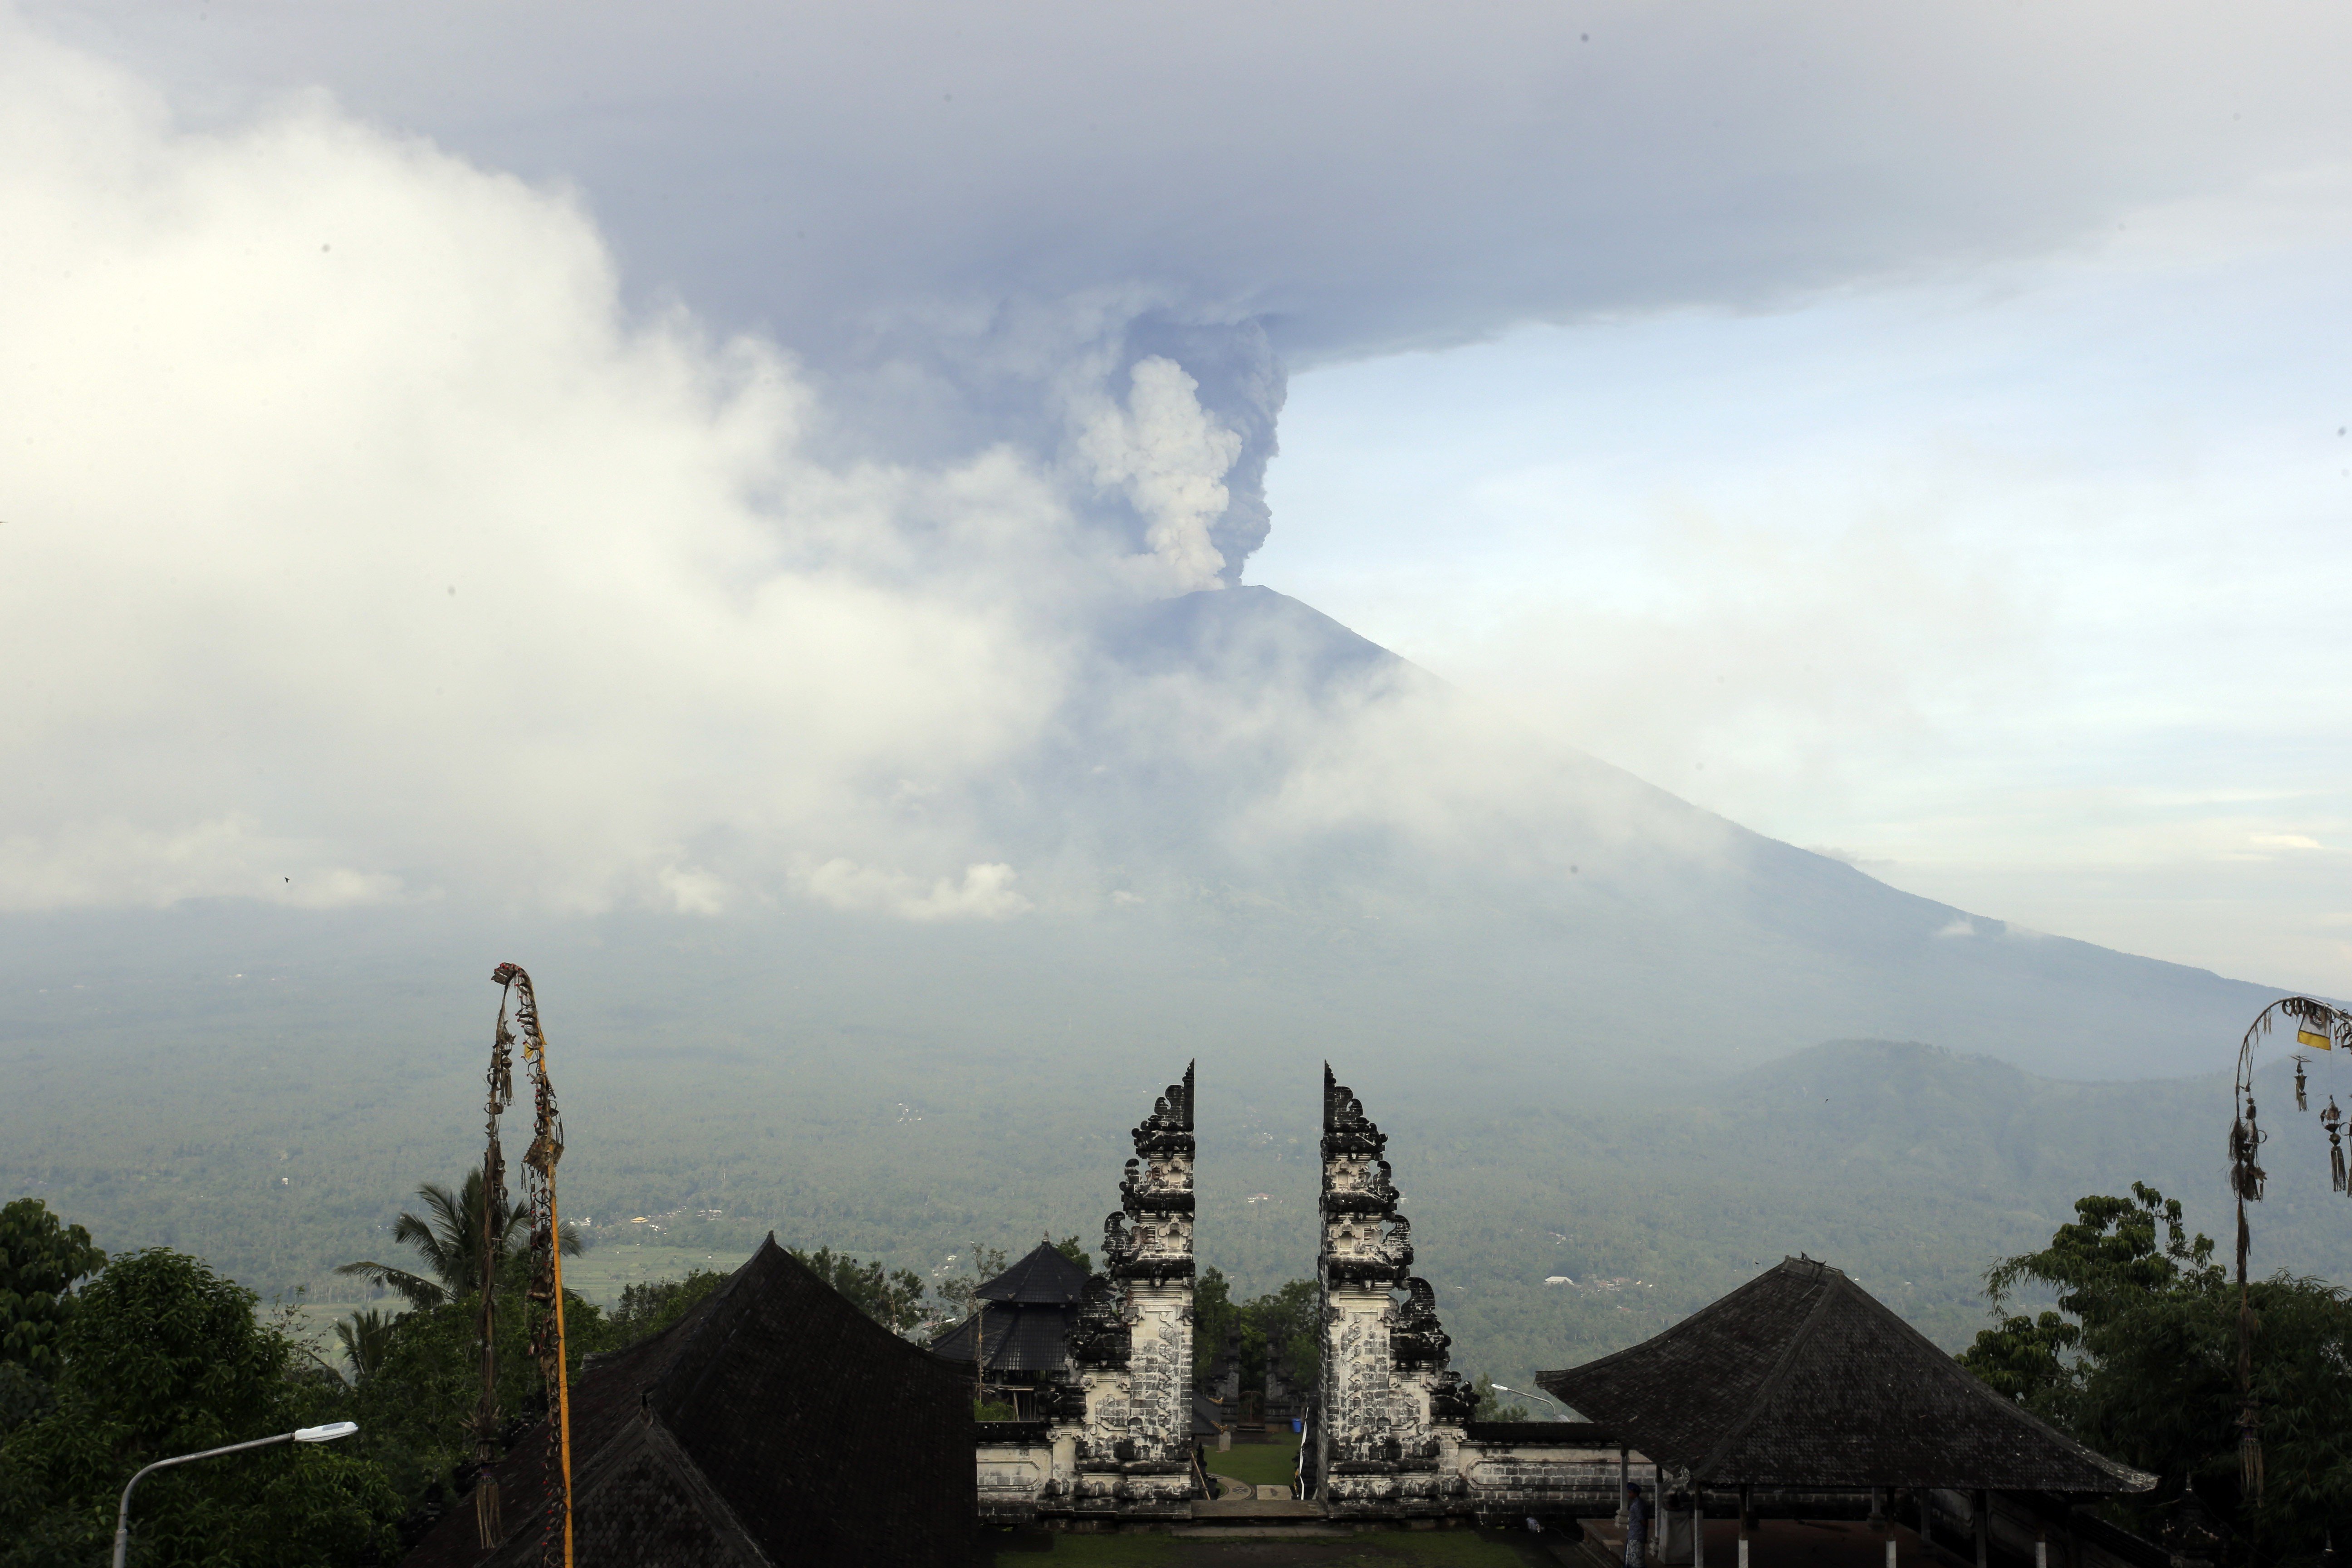 Huge columns of thick grey smoke have been released from Mount Agung in Bali, reaching more than 3km into the sky and forcing flights to be grounded. Photo: AP